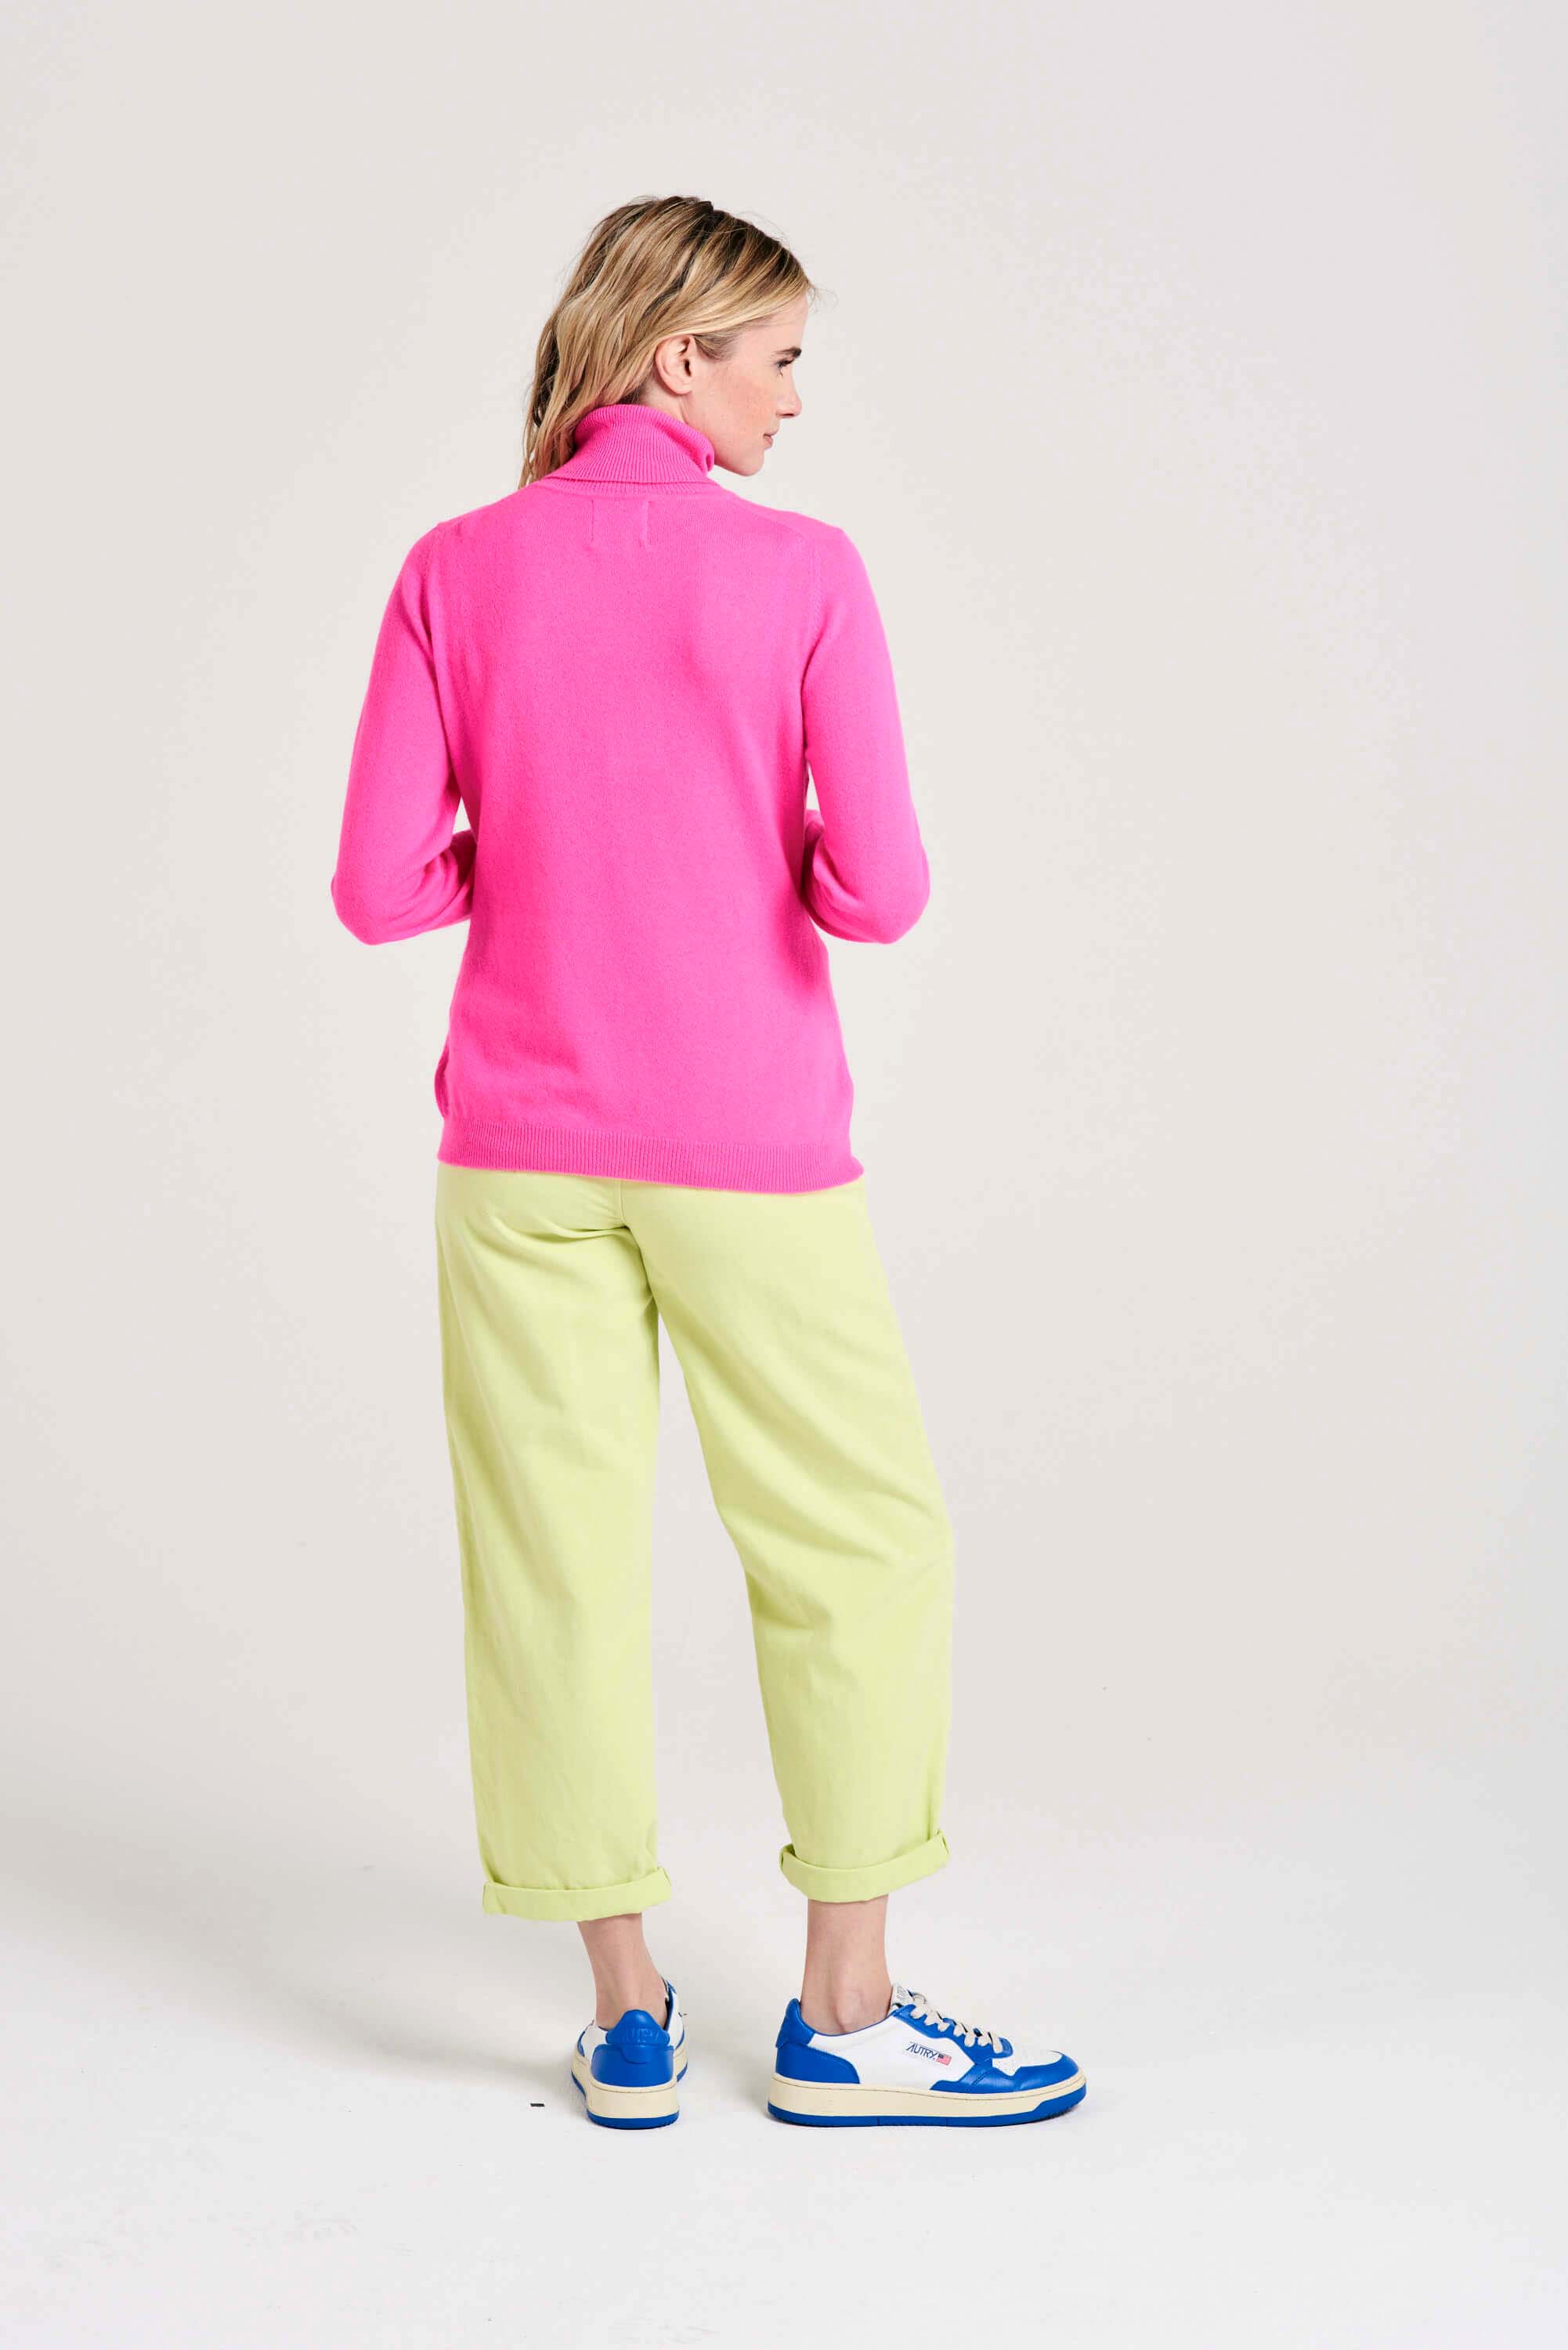 Blonde female model wearing Jumper1234 hot pink cashmere roll neck facing away from the camera